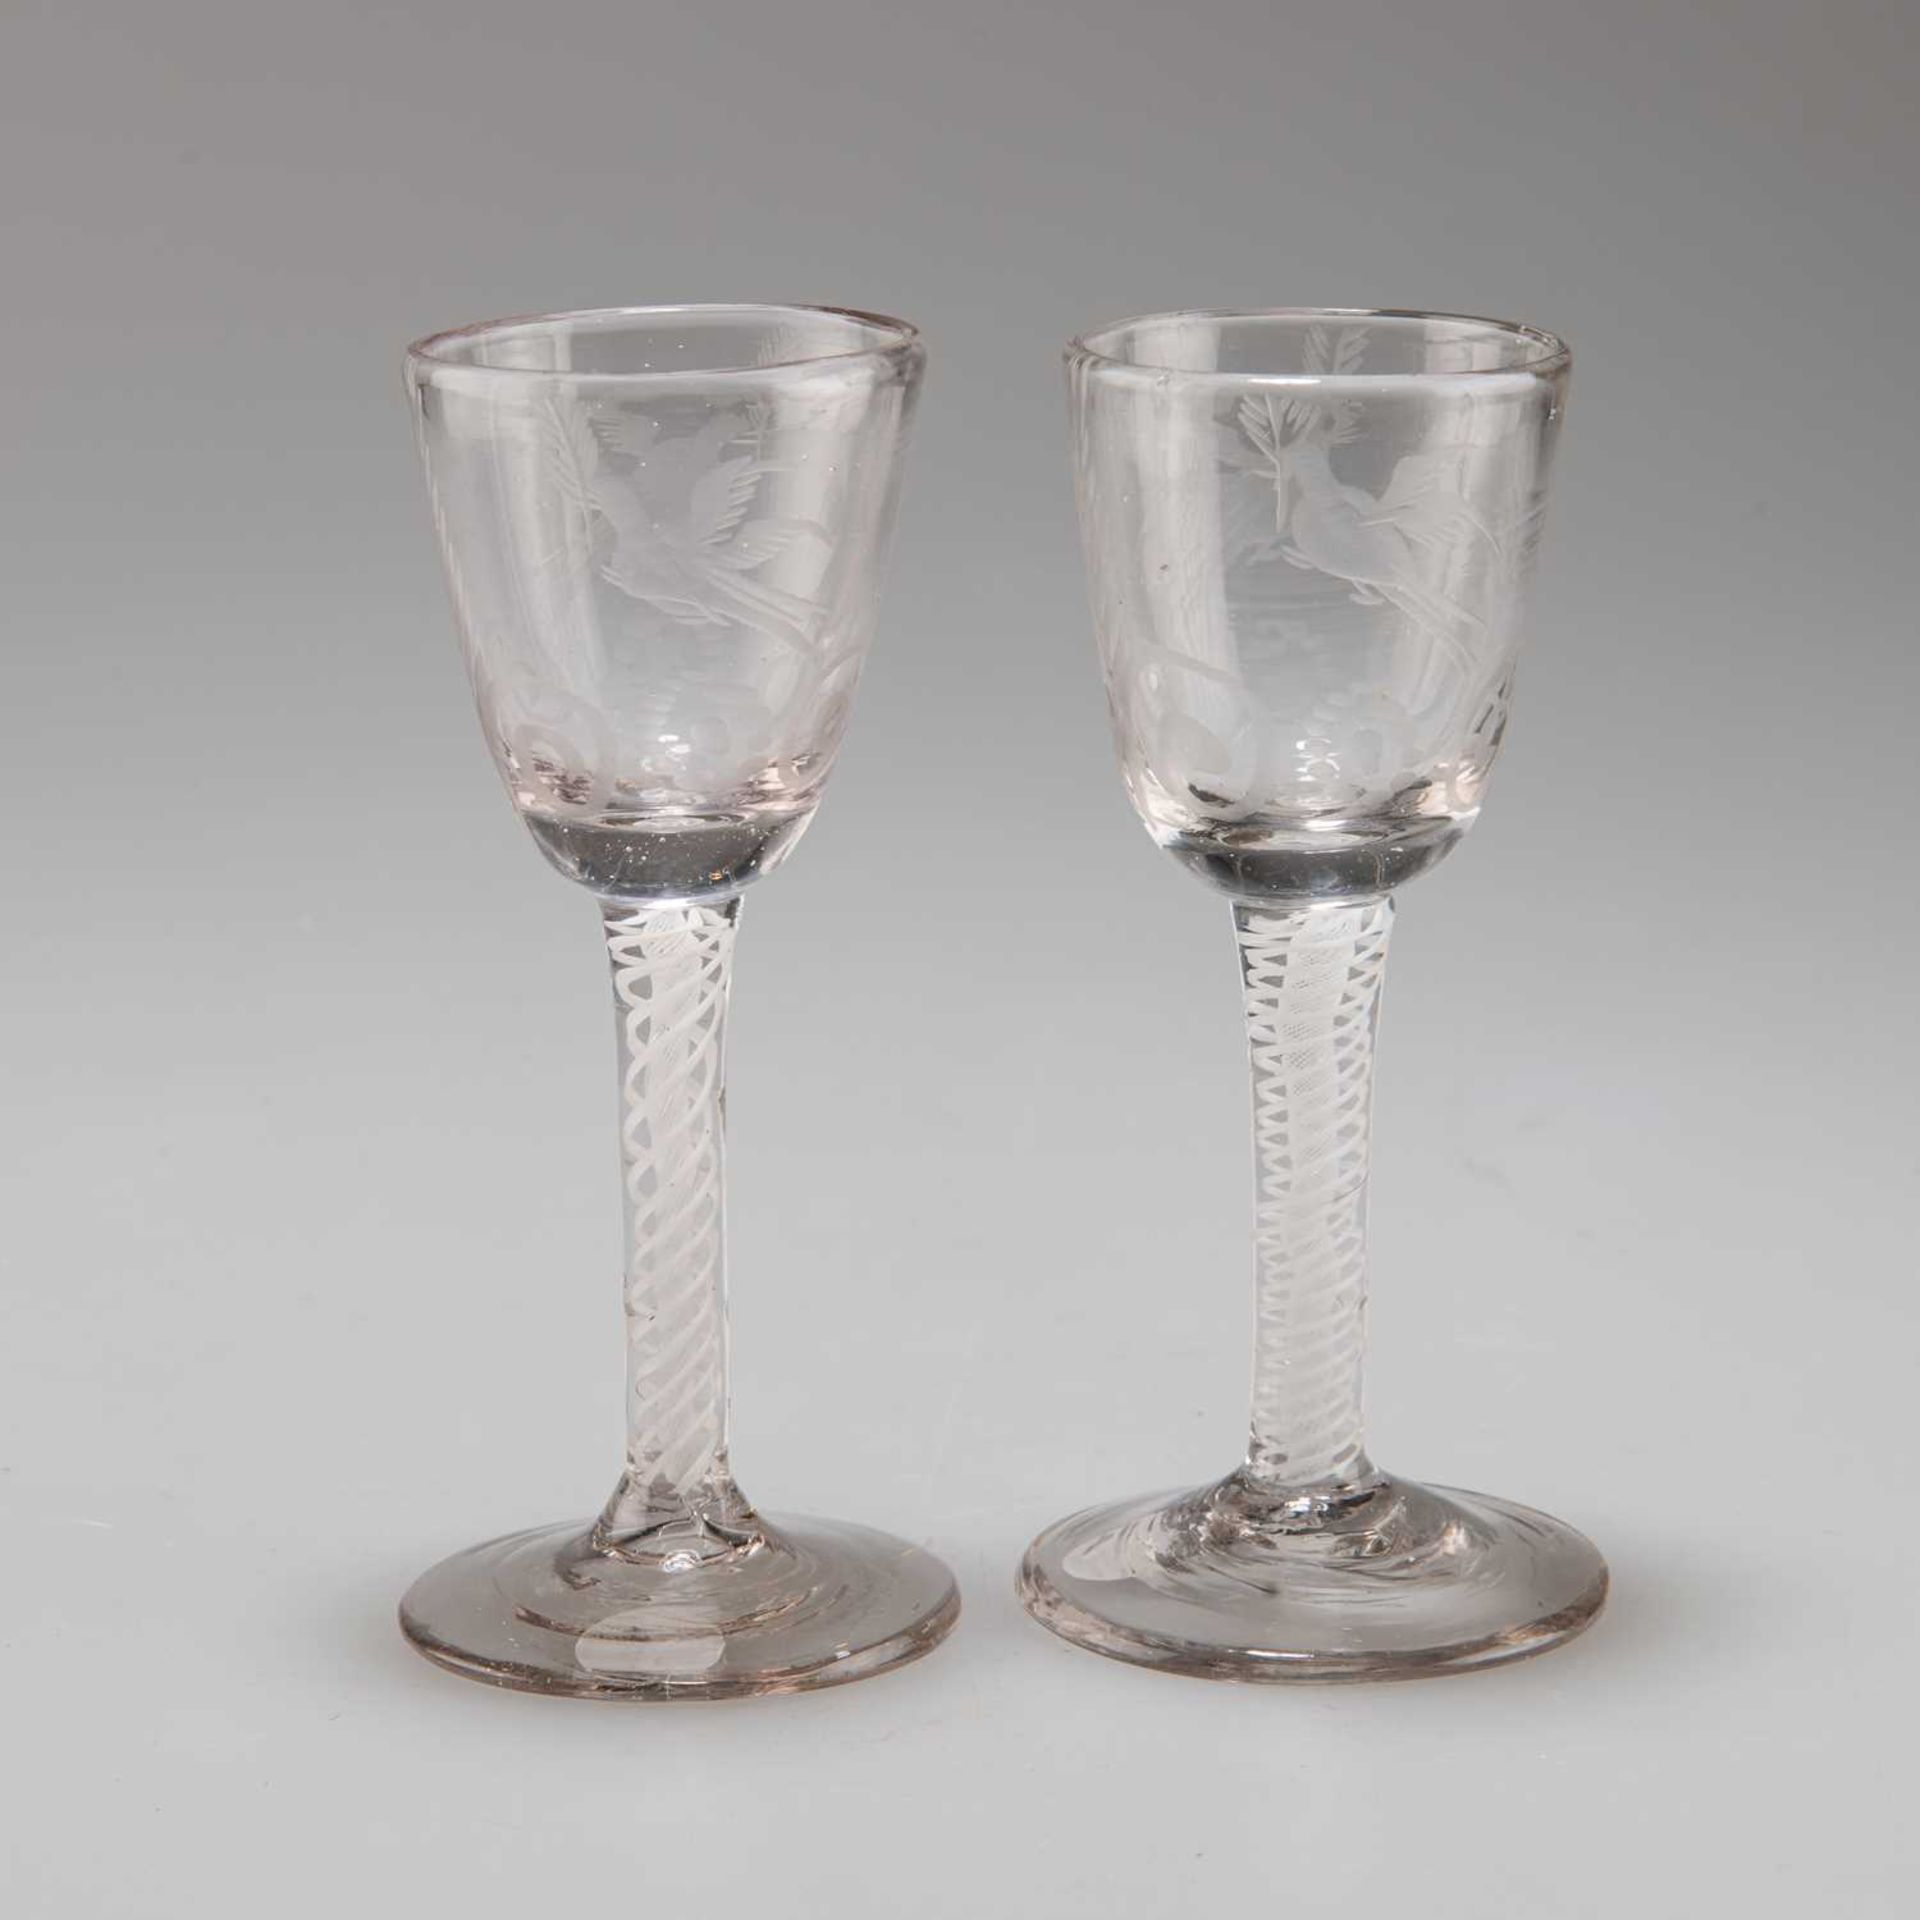 A PAIR OF 'PEACE' WINE GLASSES, CIRCA 1775